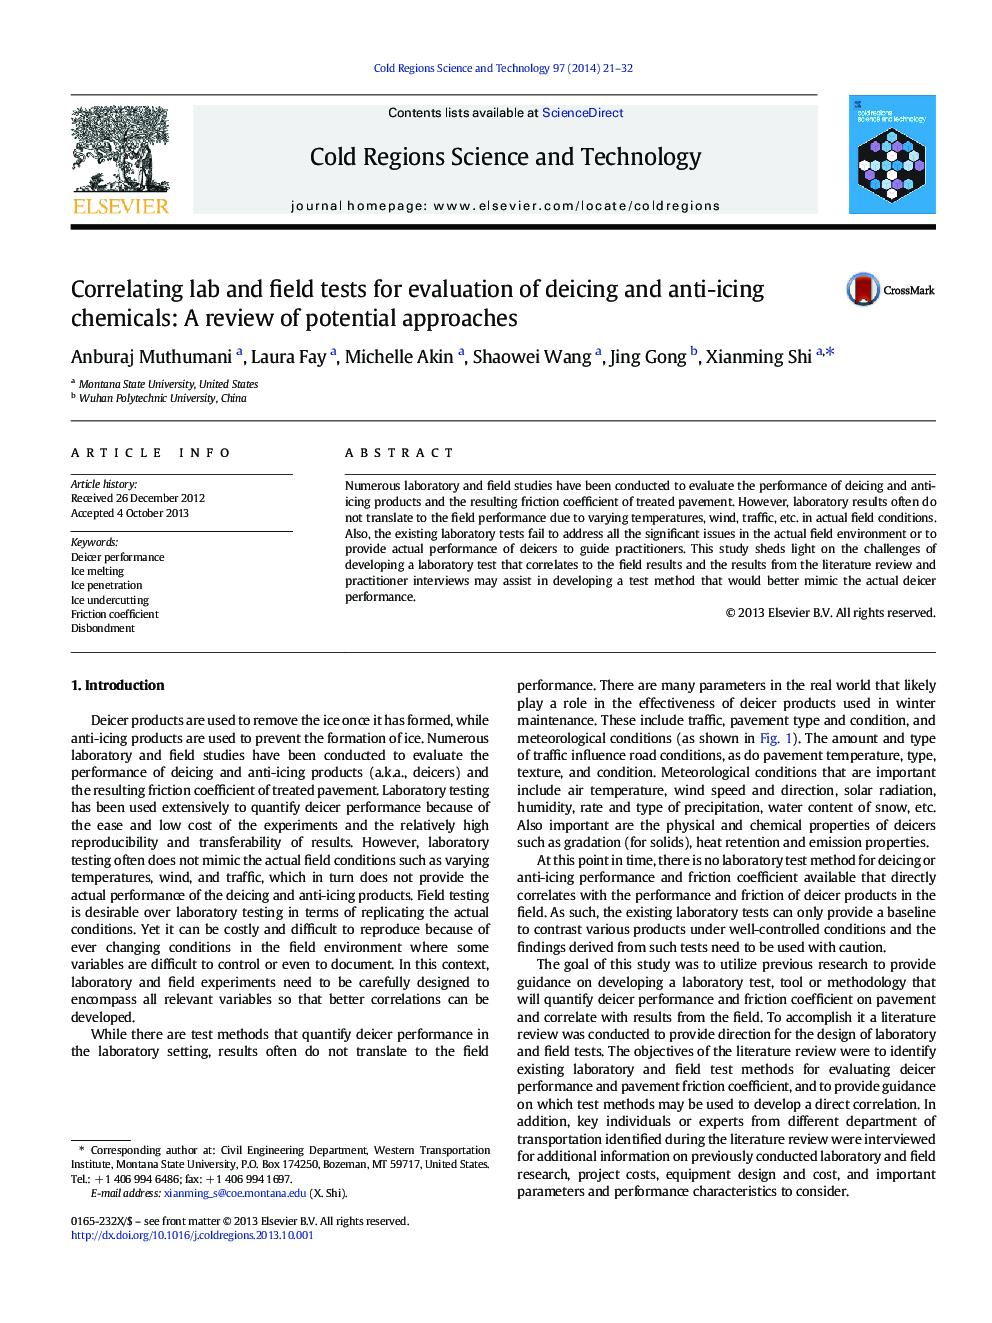 Correlating lab and field tests for evaluation of deicing and anti-icing chemicals: A review of potential approaches